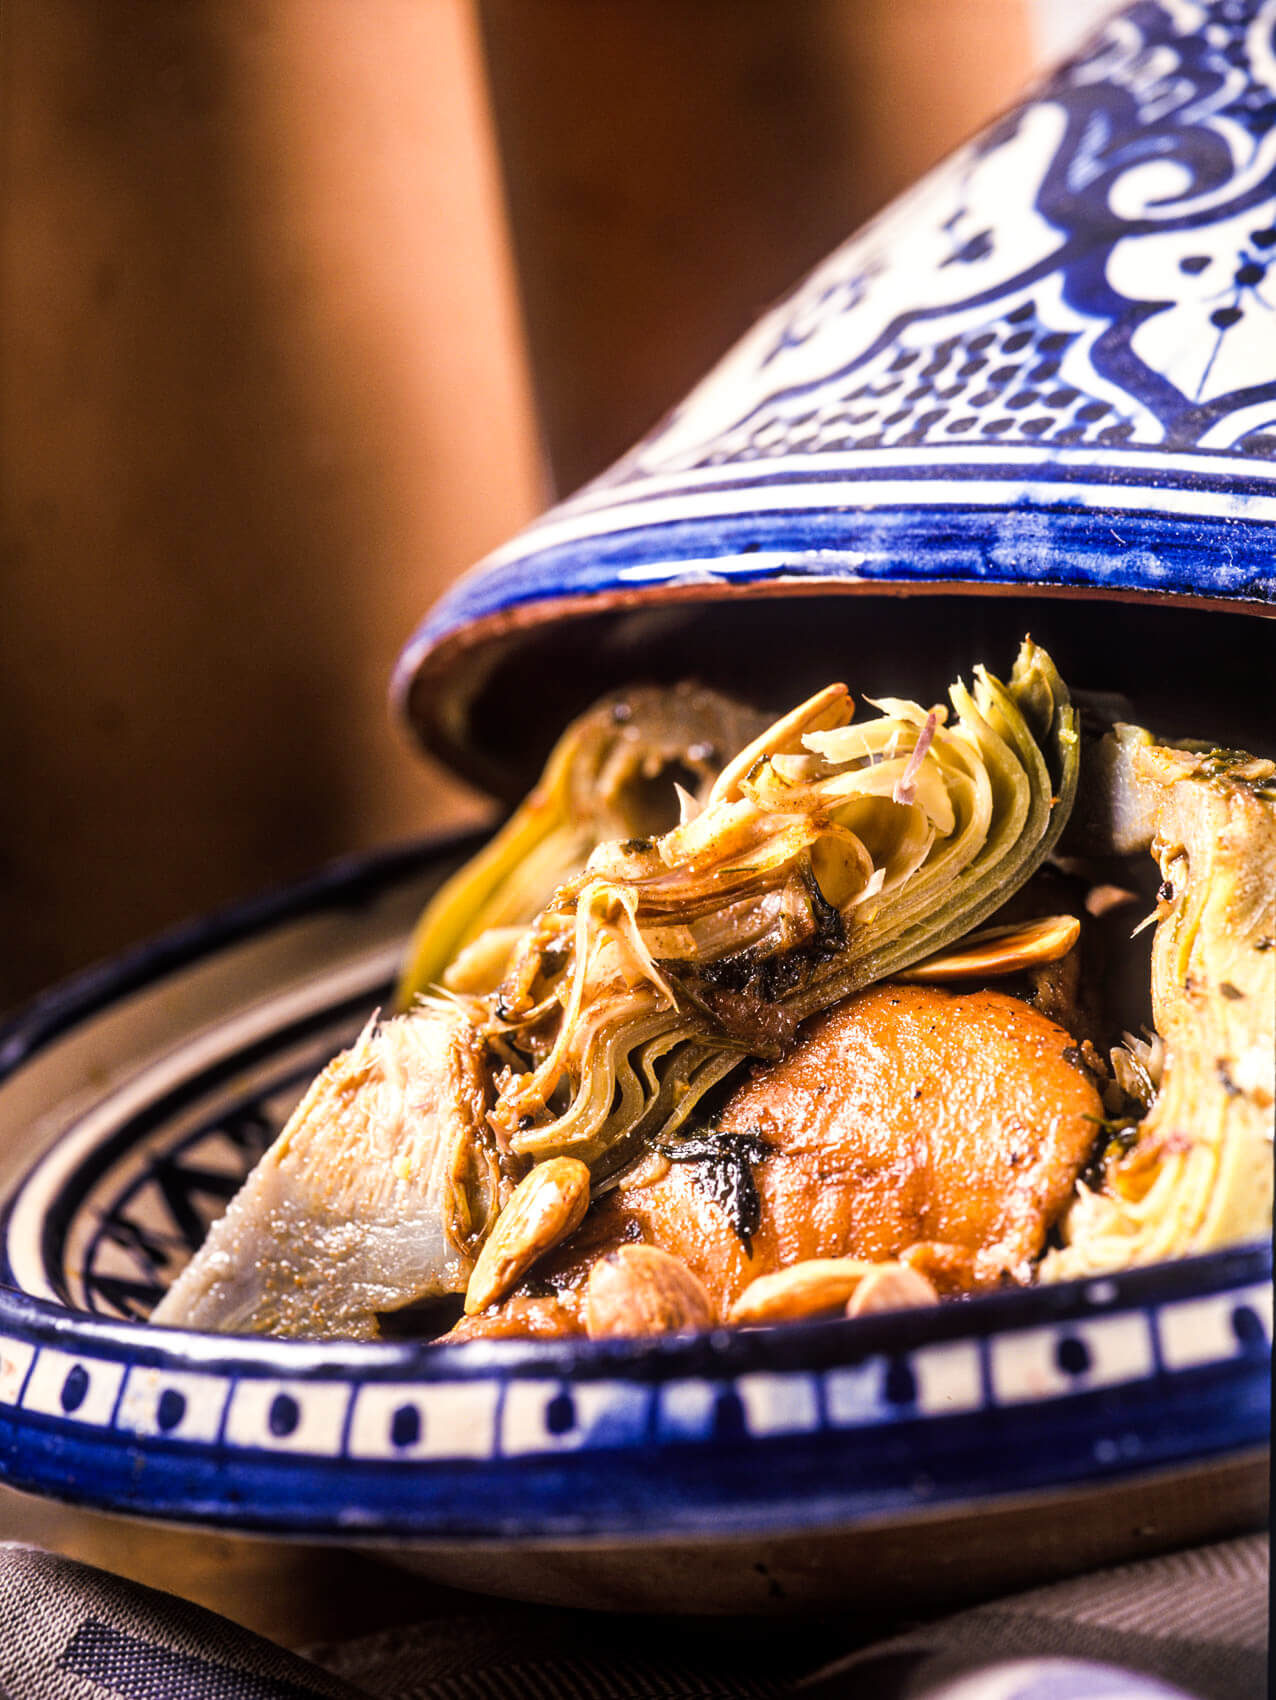 An open tagine filled with shredded artichokes, chicken and other ingredients.